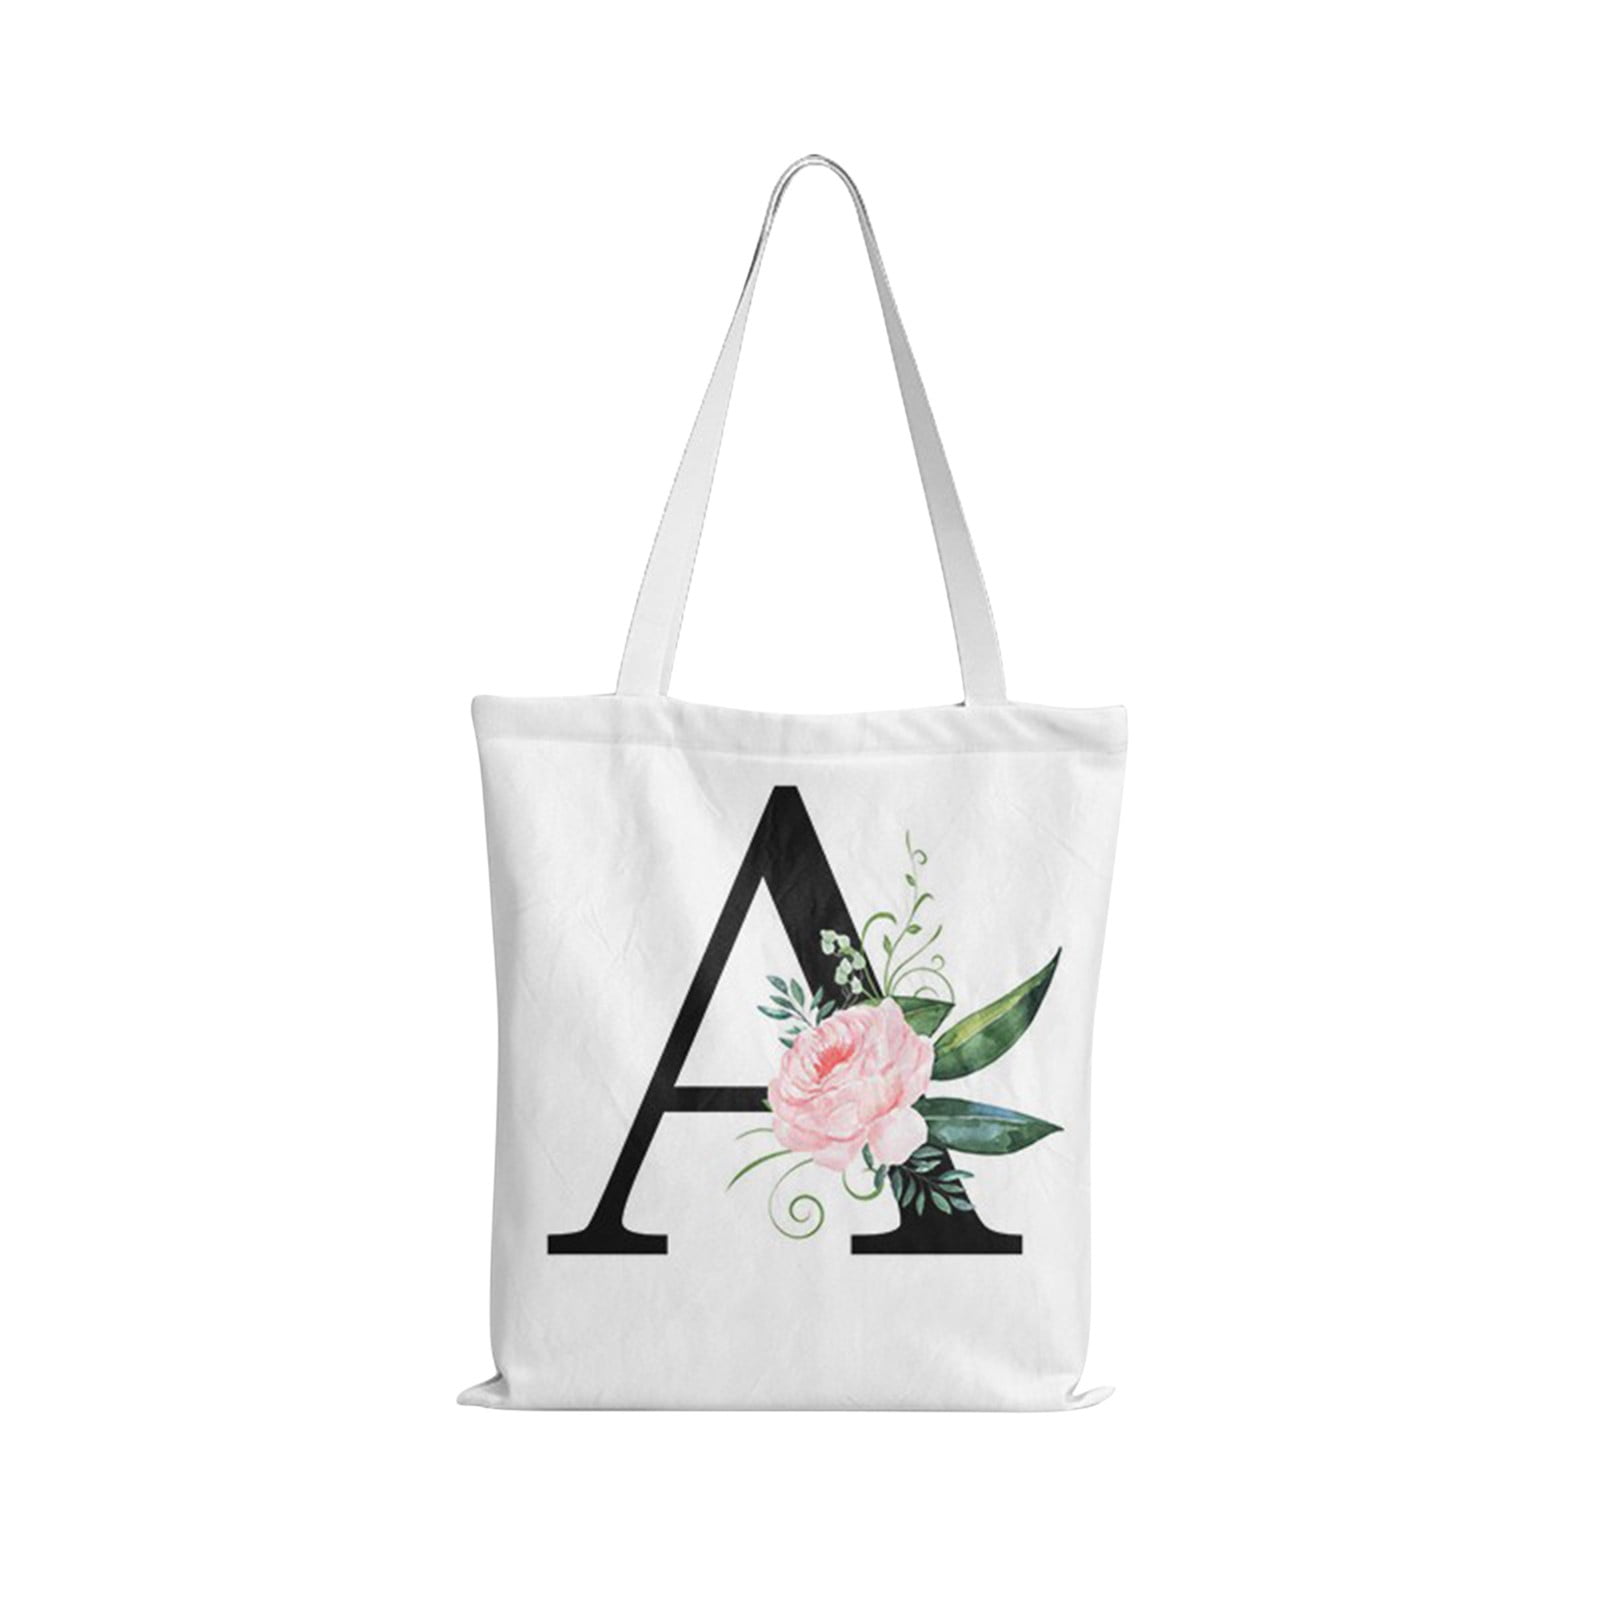 Personalized Initial Canvas Tote Bag, Perfect Gift For Weddings